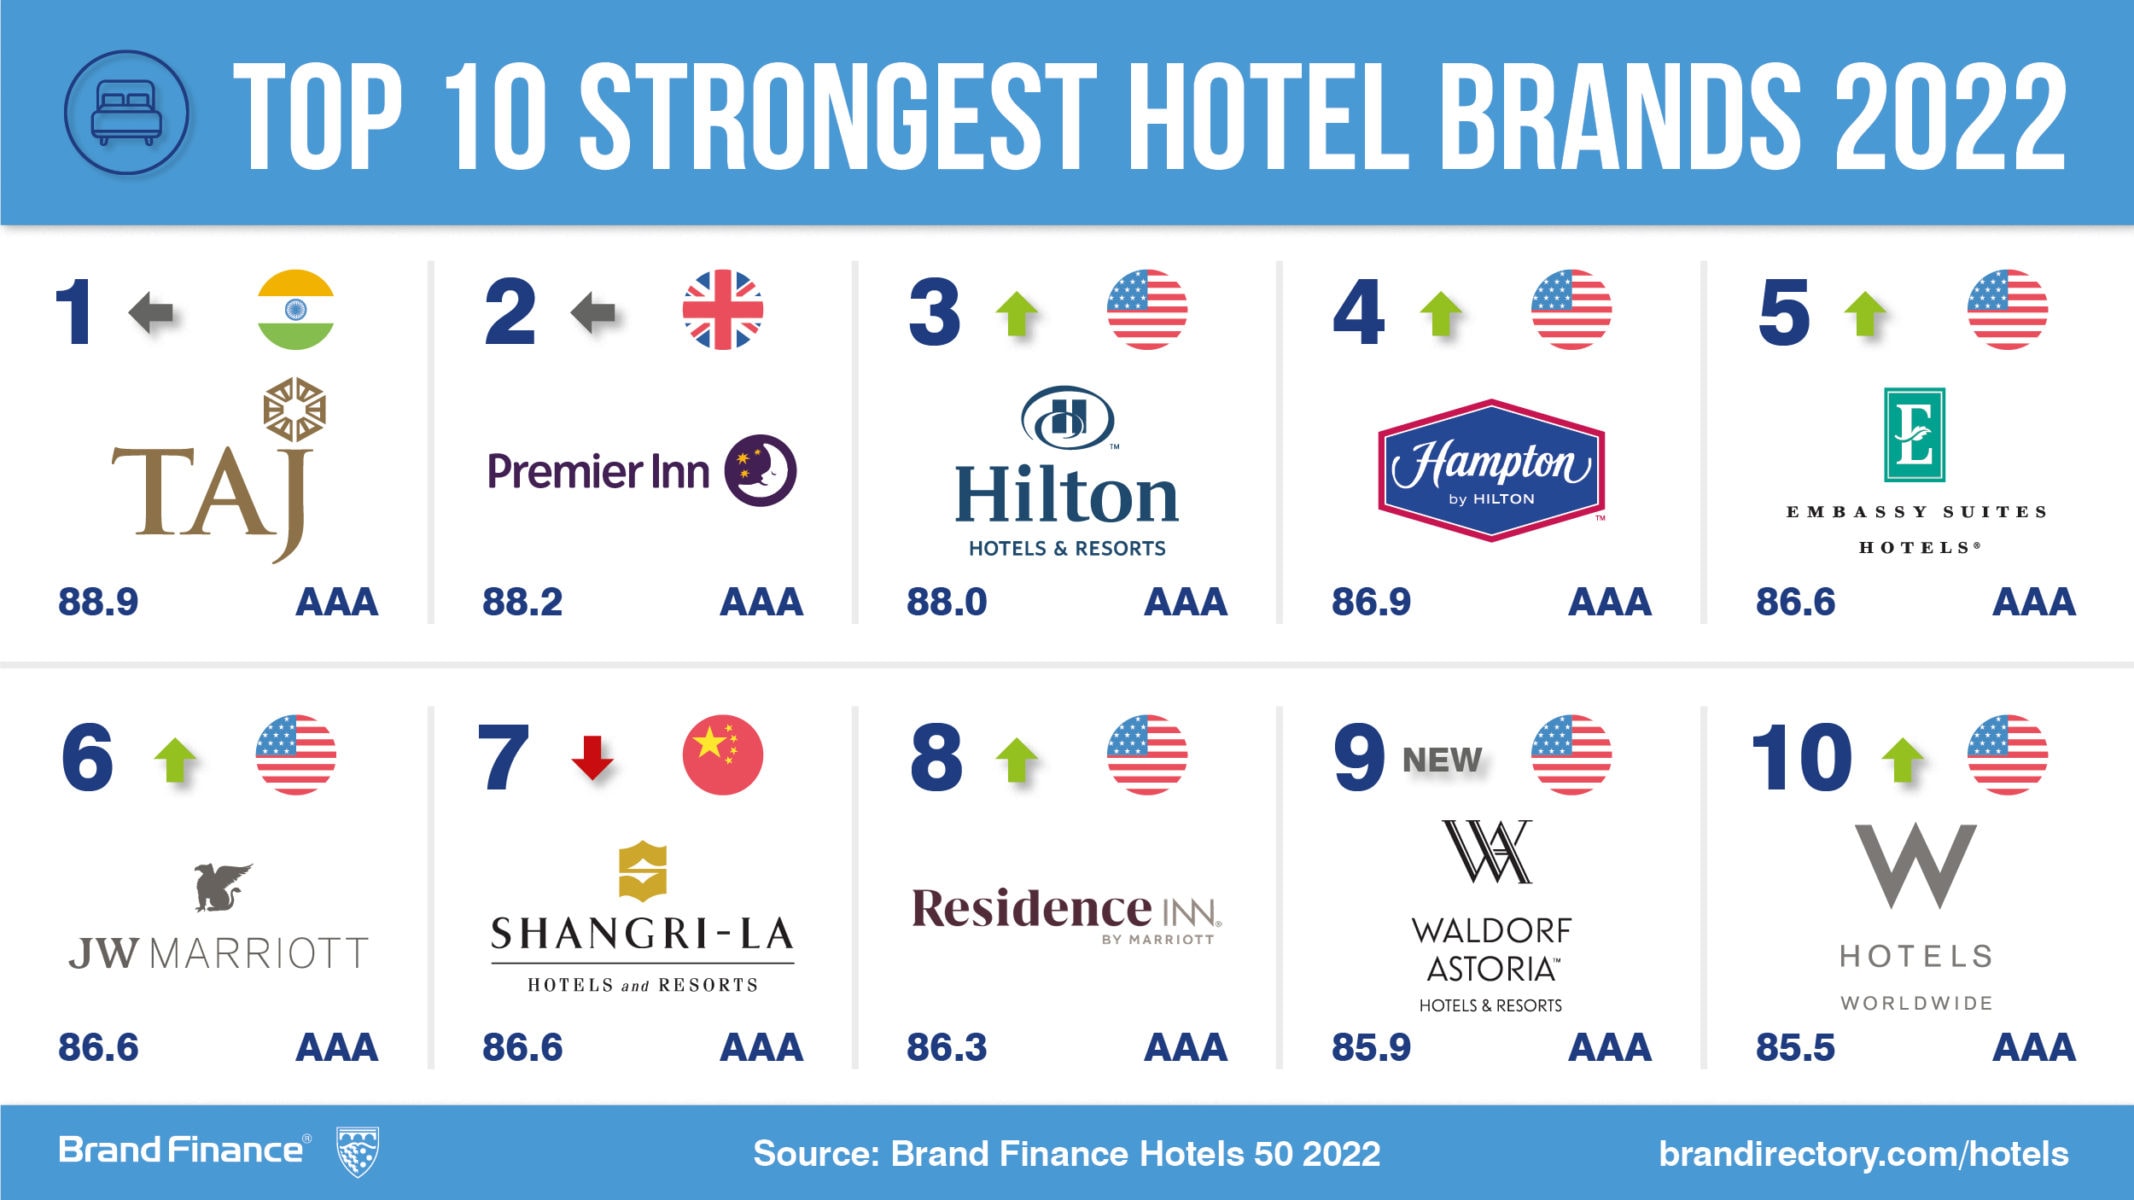 Hilton brand value leaps ahead to retain top position, while most hotel brands remain below pre